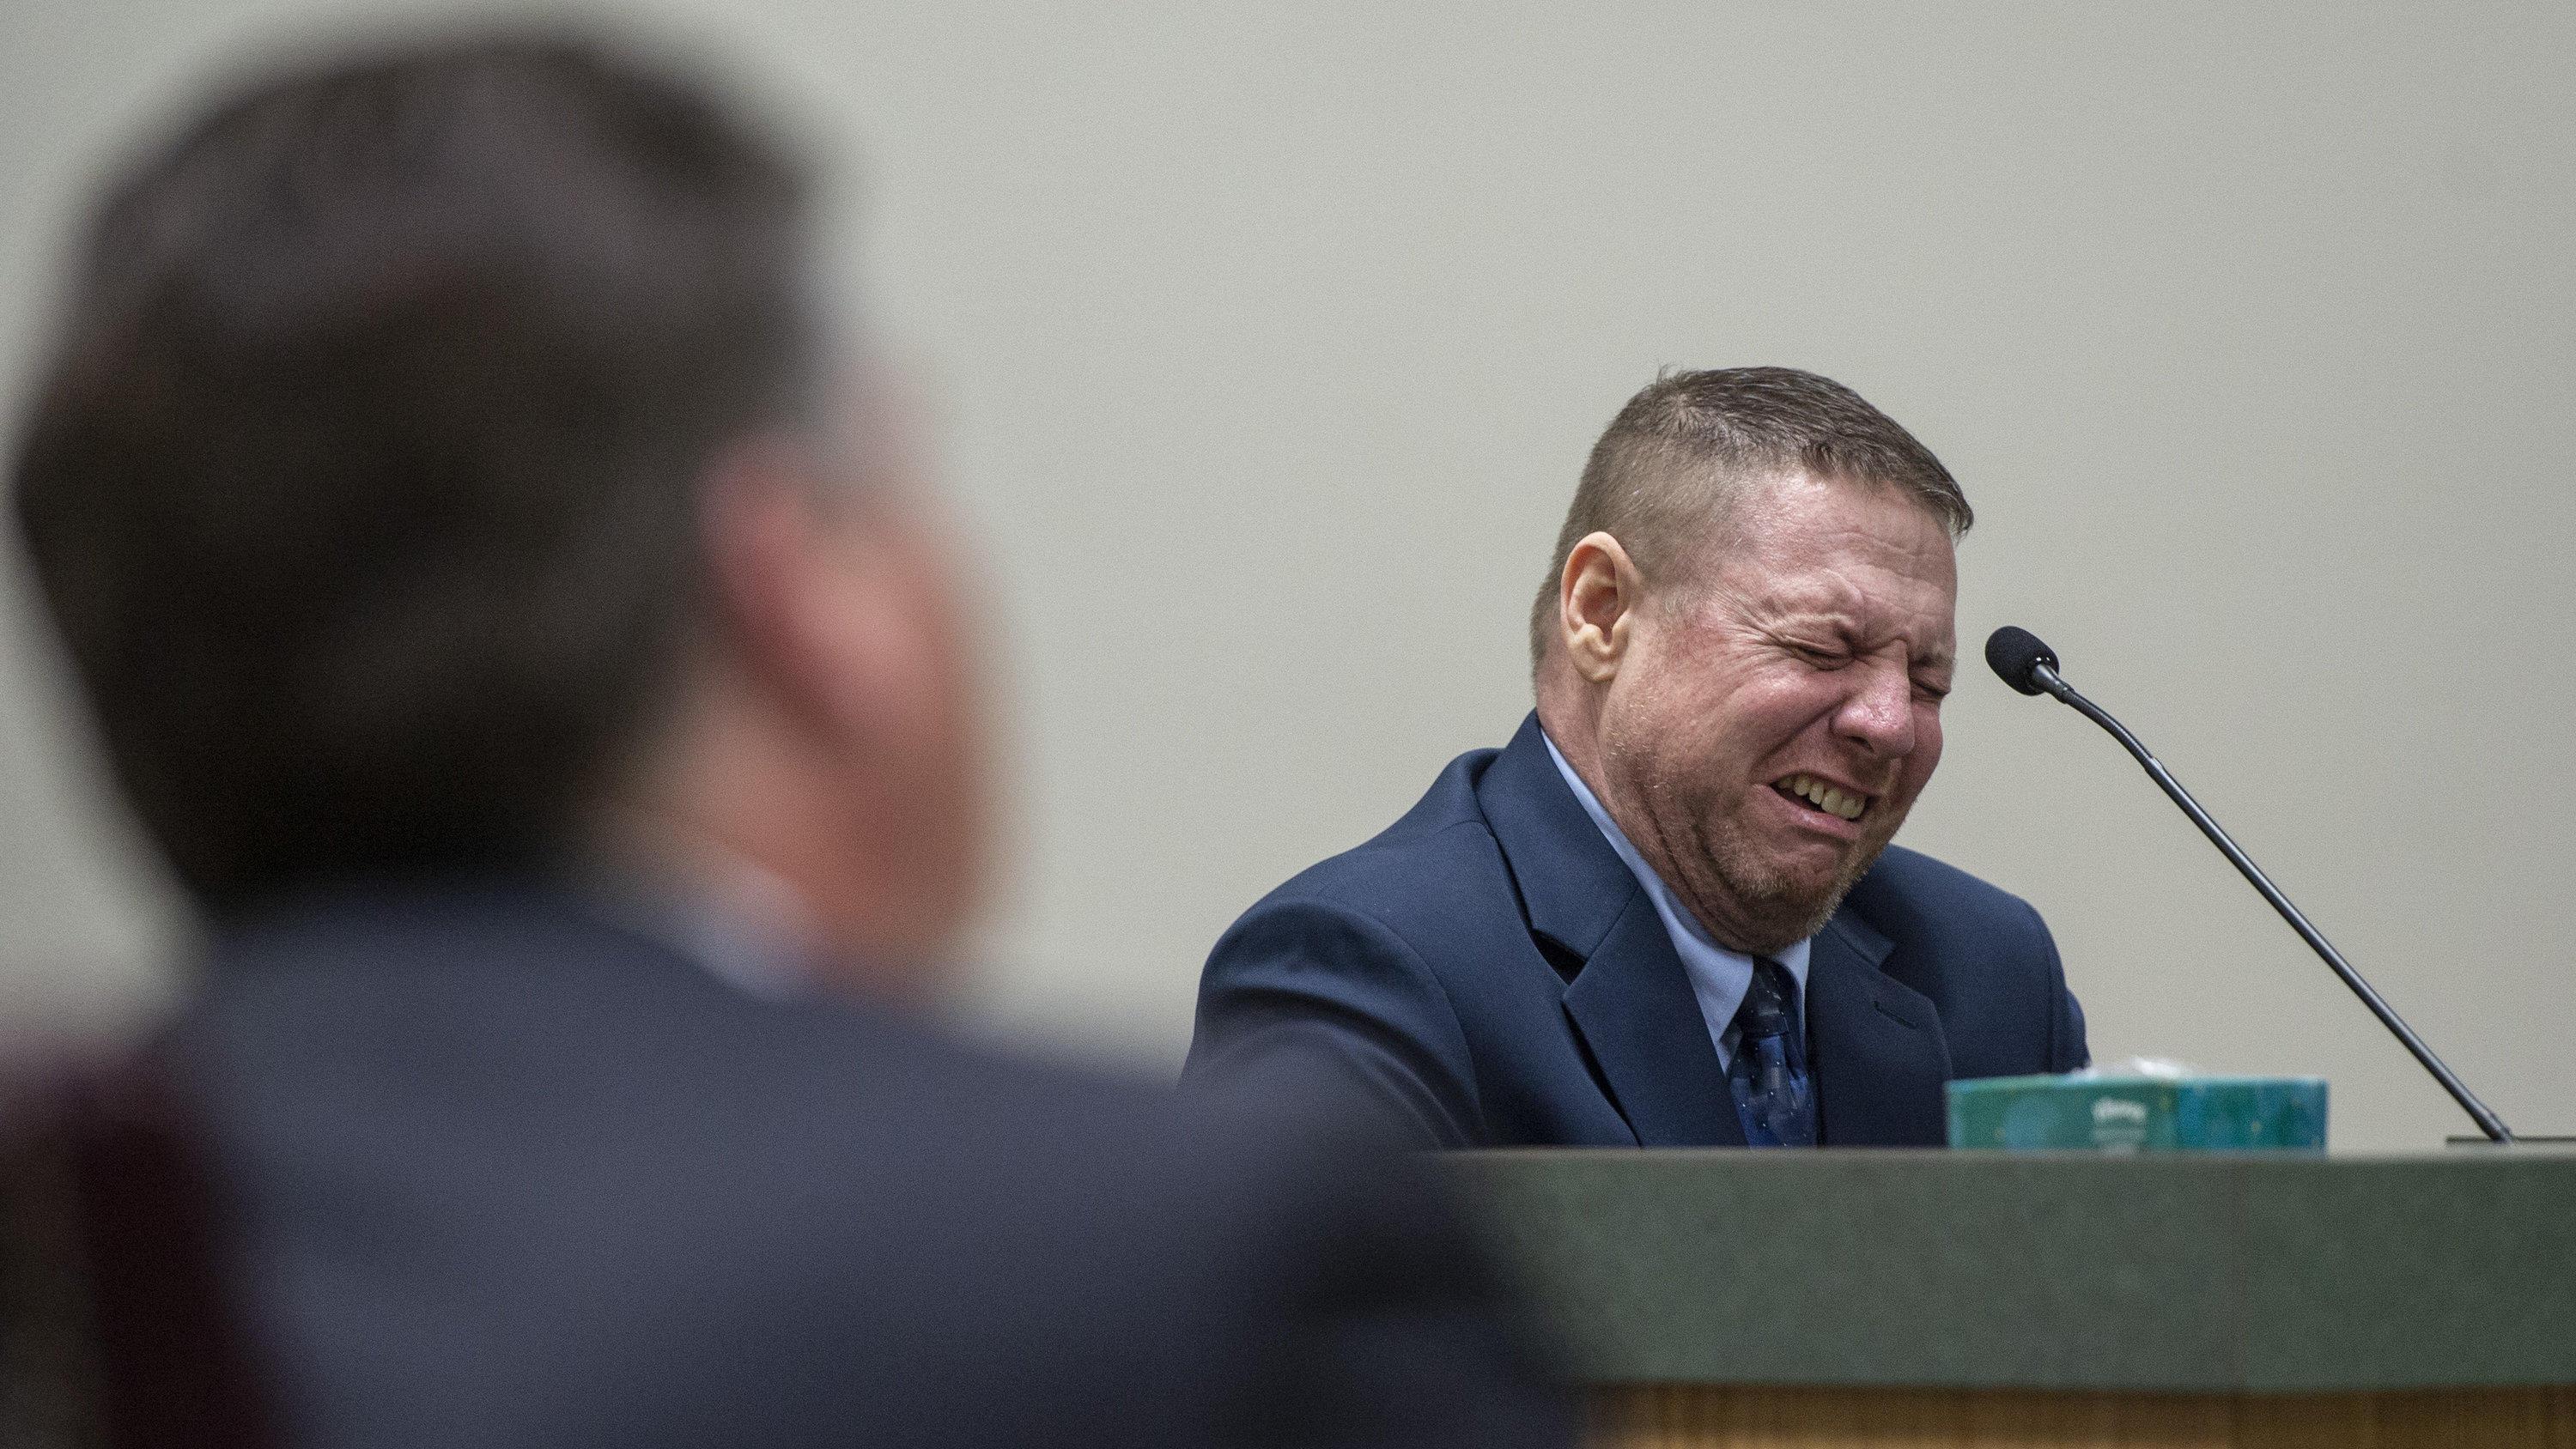 Jacob Blair Scott, who is accused of sexually assaulting a minor, cries out while on the witness stand after testifying about his family relationships after being asked an unrelated question during his trial in Jackson County Circuit Court in Pascago